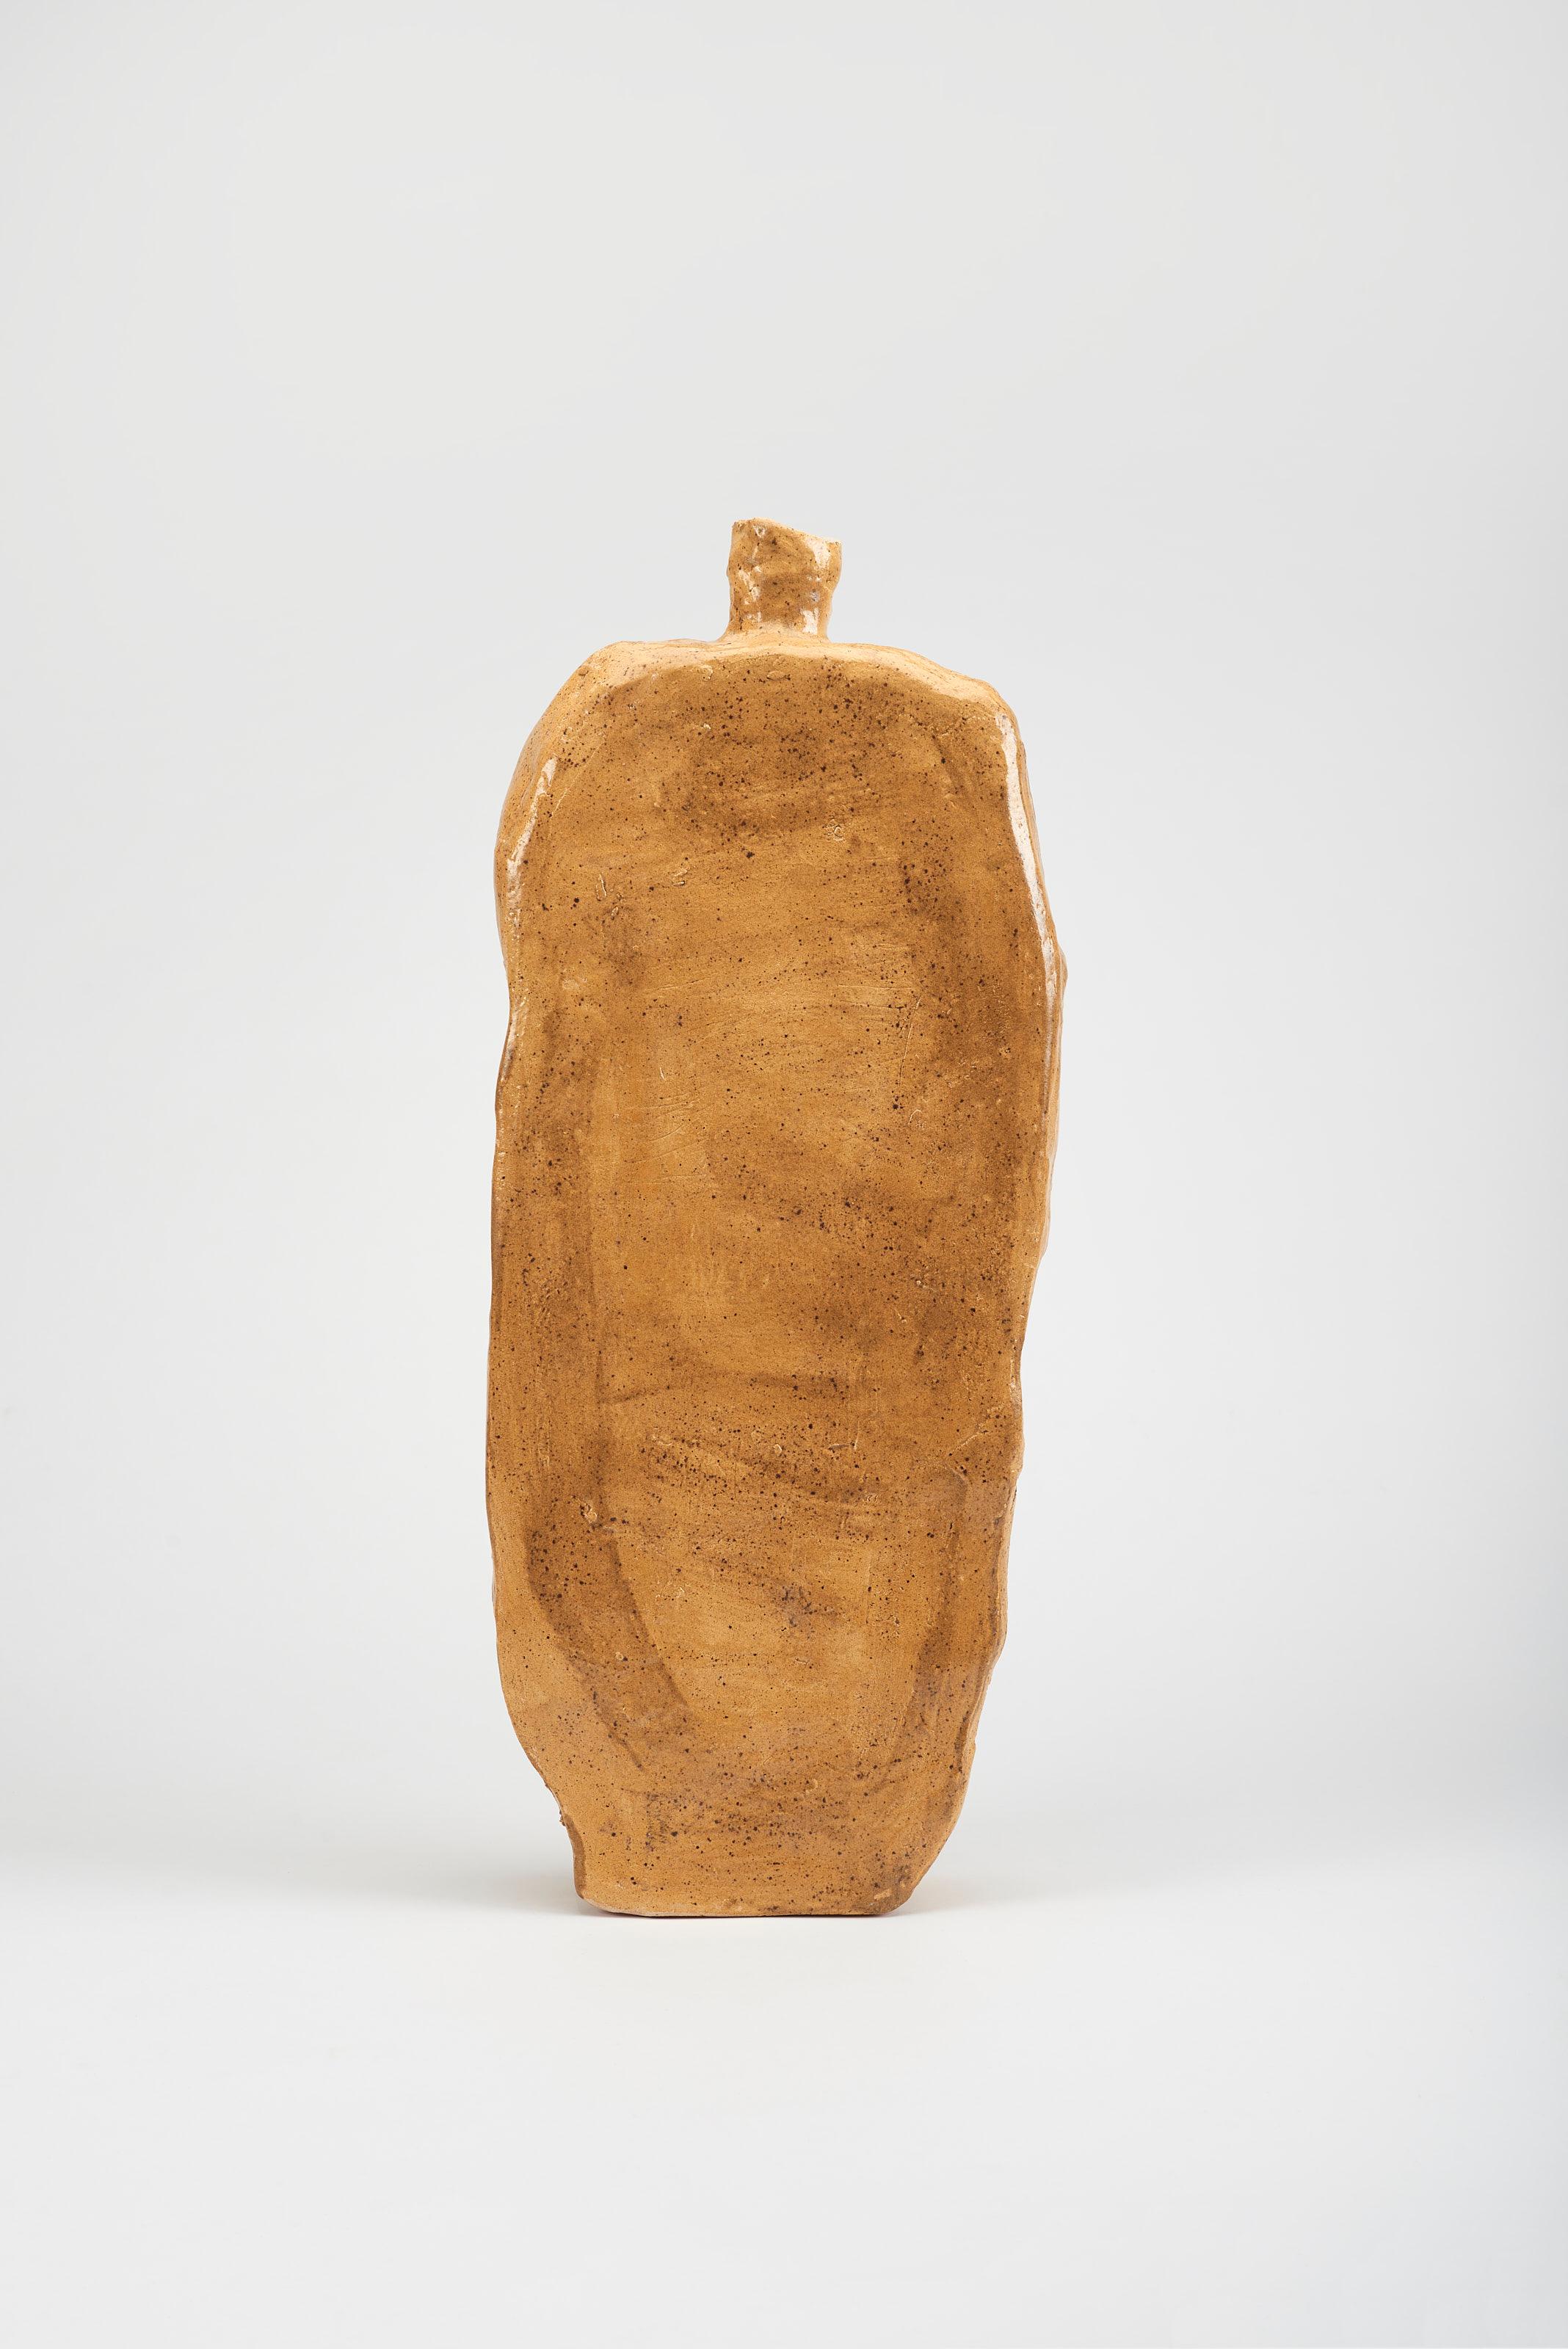 Ovas Large Vase by Willem Van Hooff
Dimensions: W 38 x D 10 x H 65 cm (Dimensions may vary as pieces are hand-made and might present slight variations in sizes)
Material: Glazed Ceramics.

Core is a serie of vessels. Inspired by prehistoric african